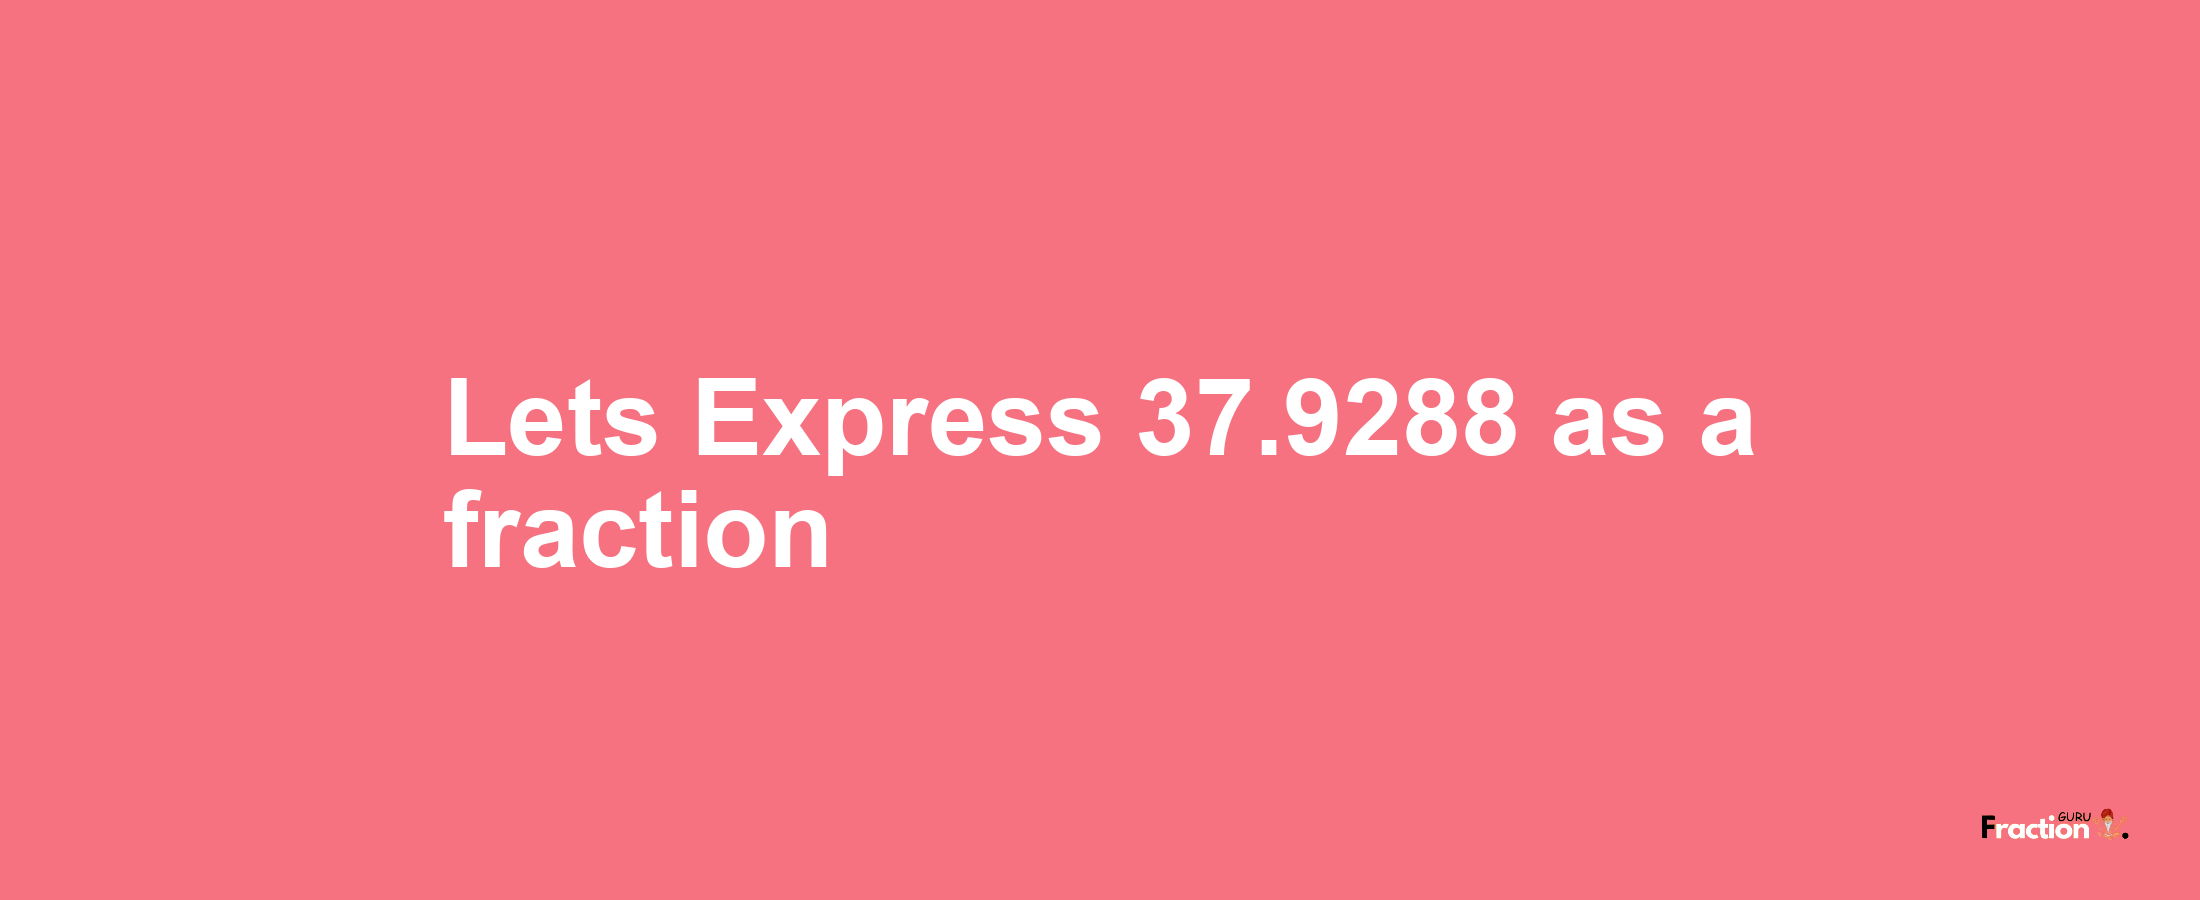 Lets Express 37.9288 as afraction